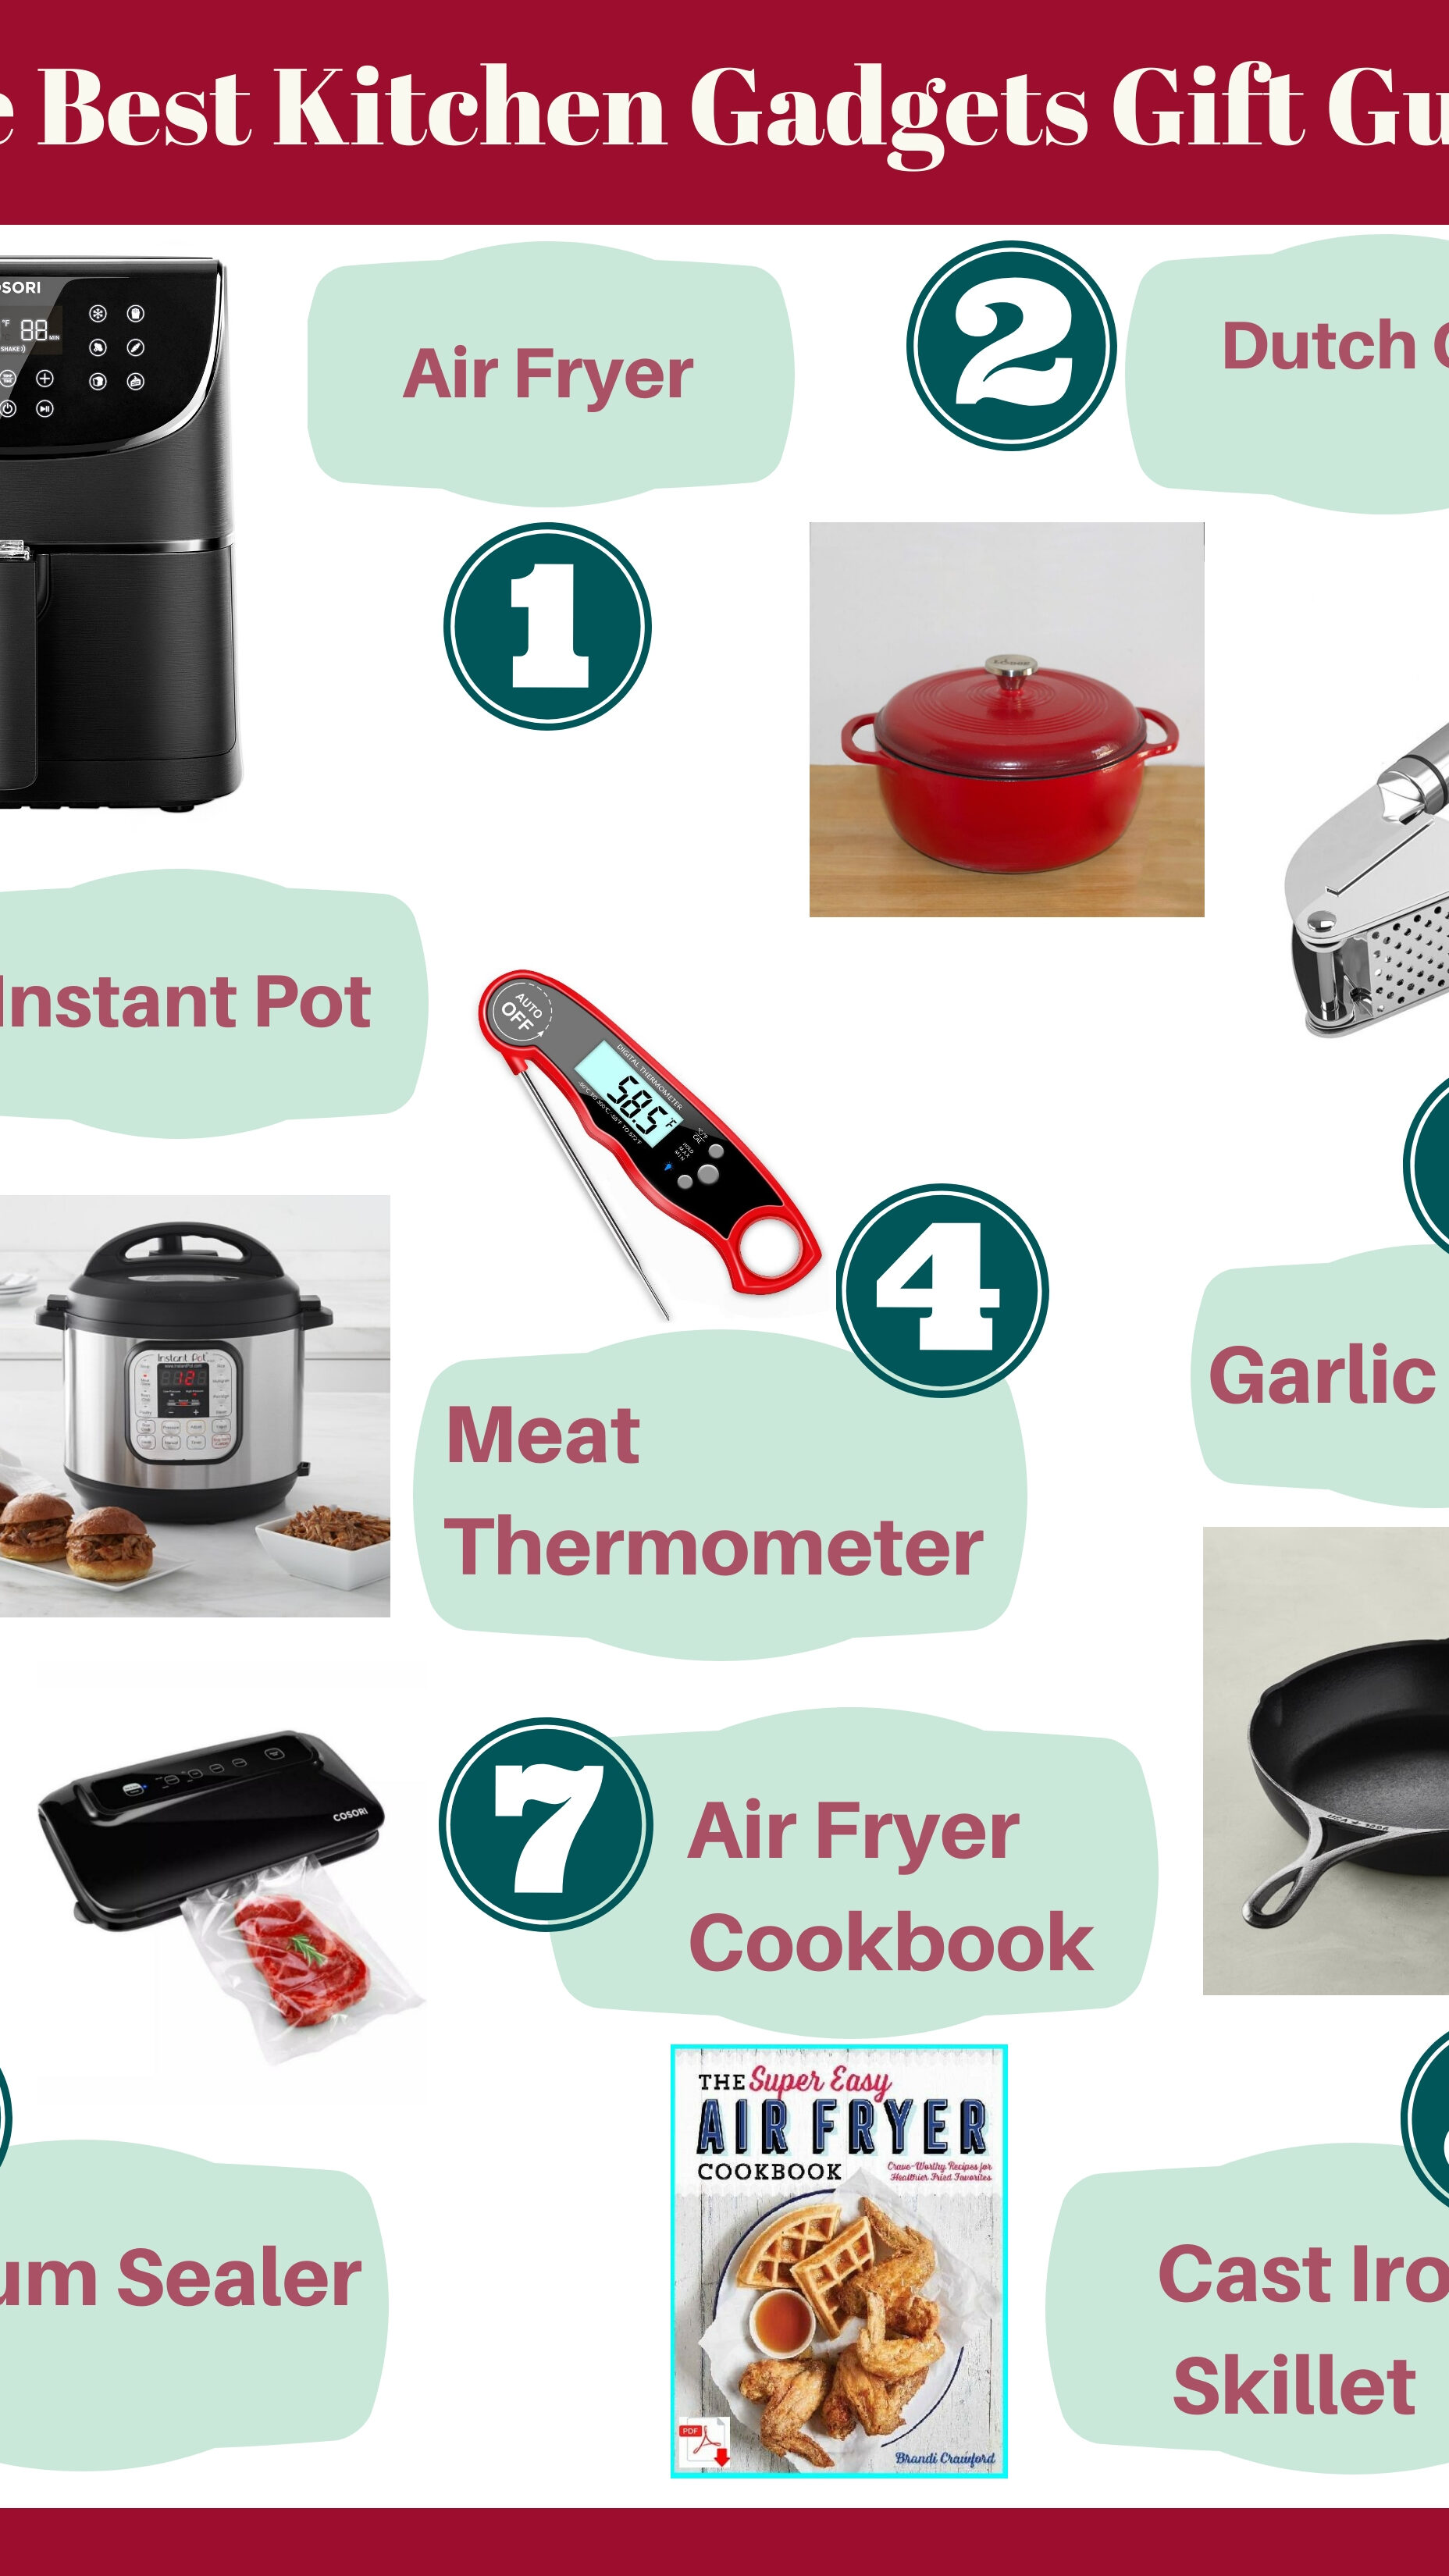 Super Practical Gift Guide - Naptime Kitchen